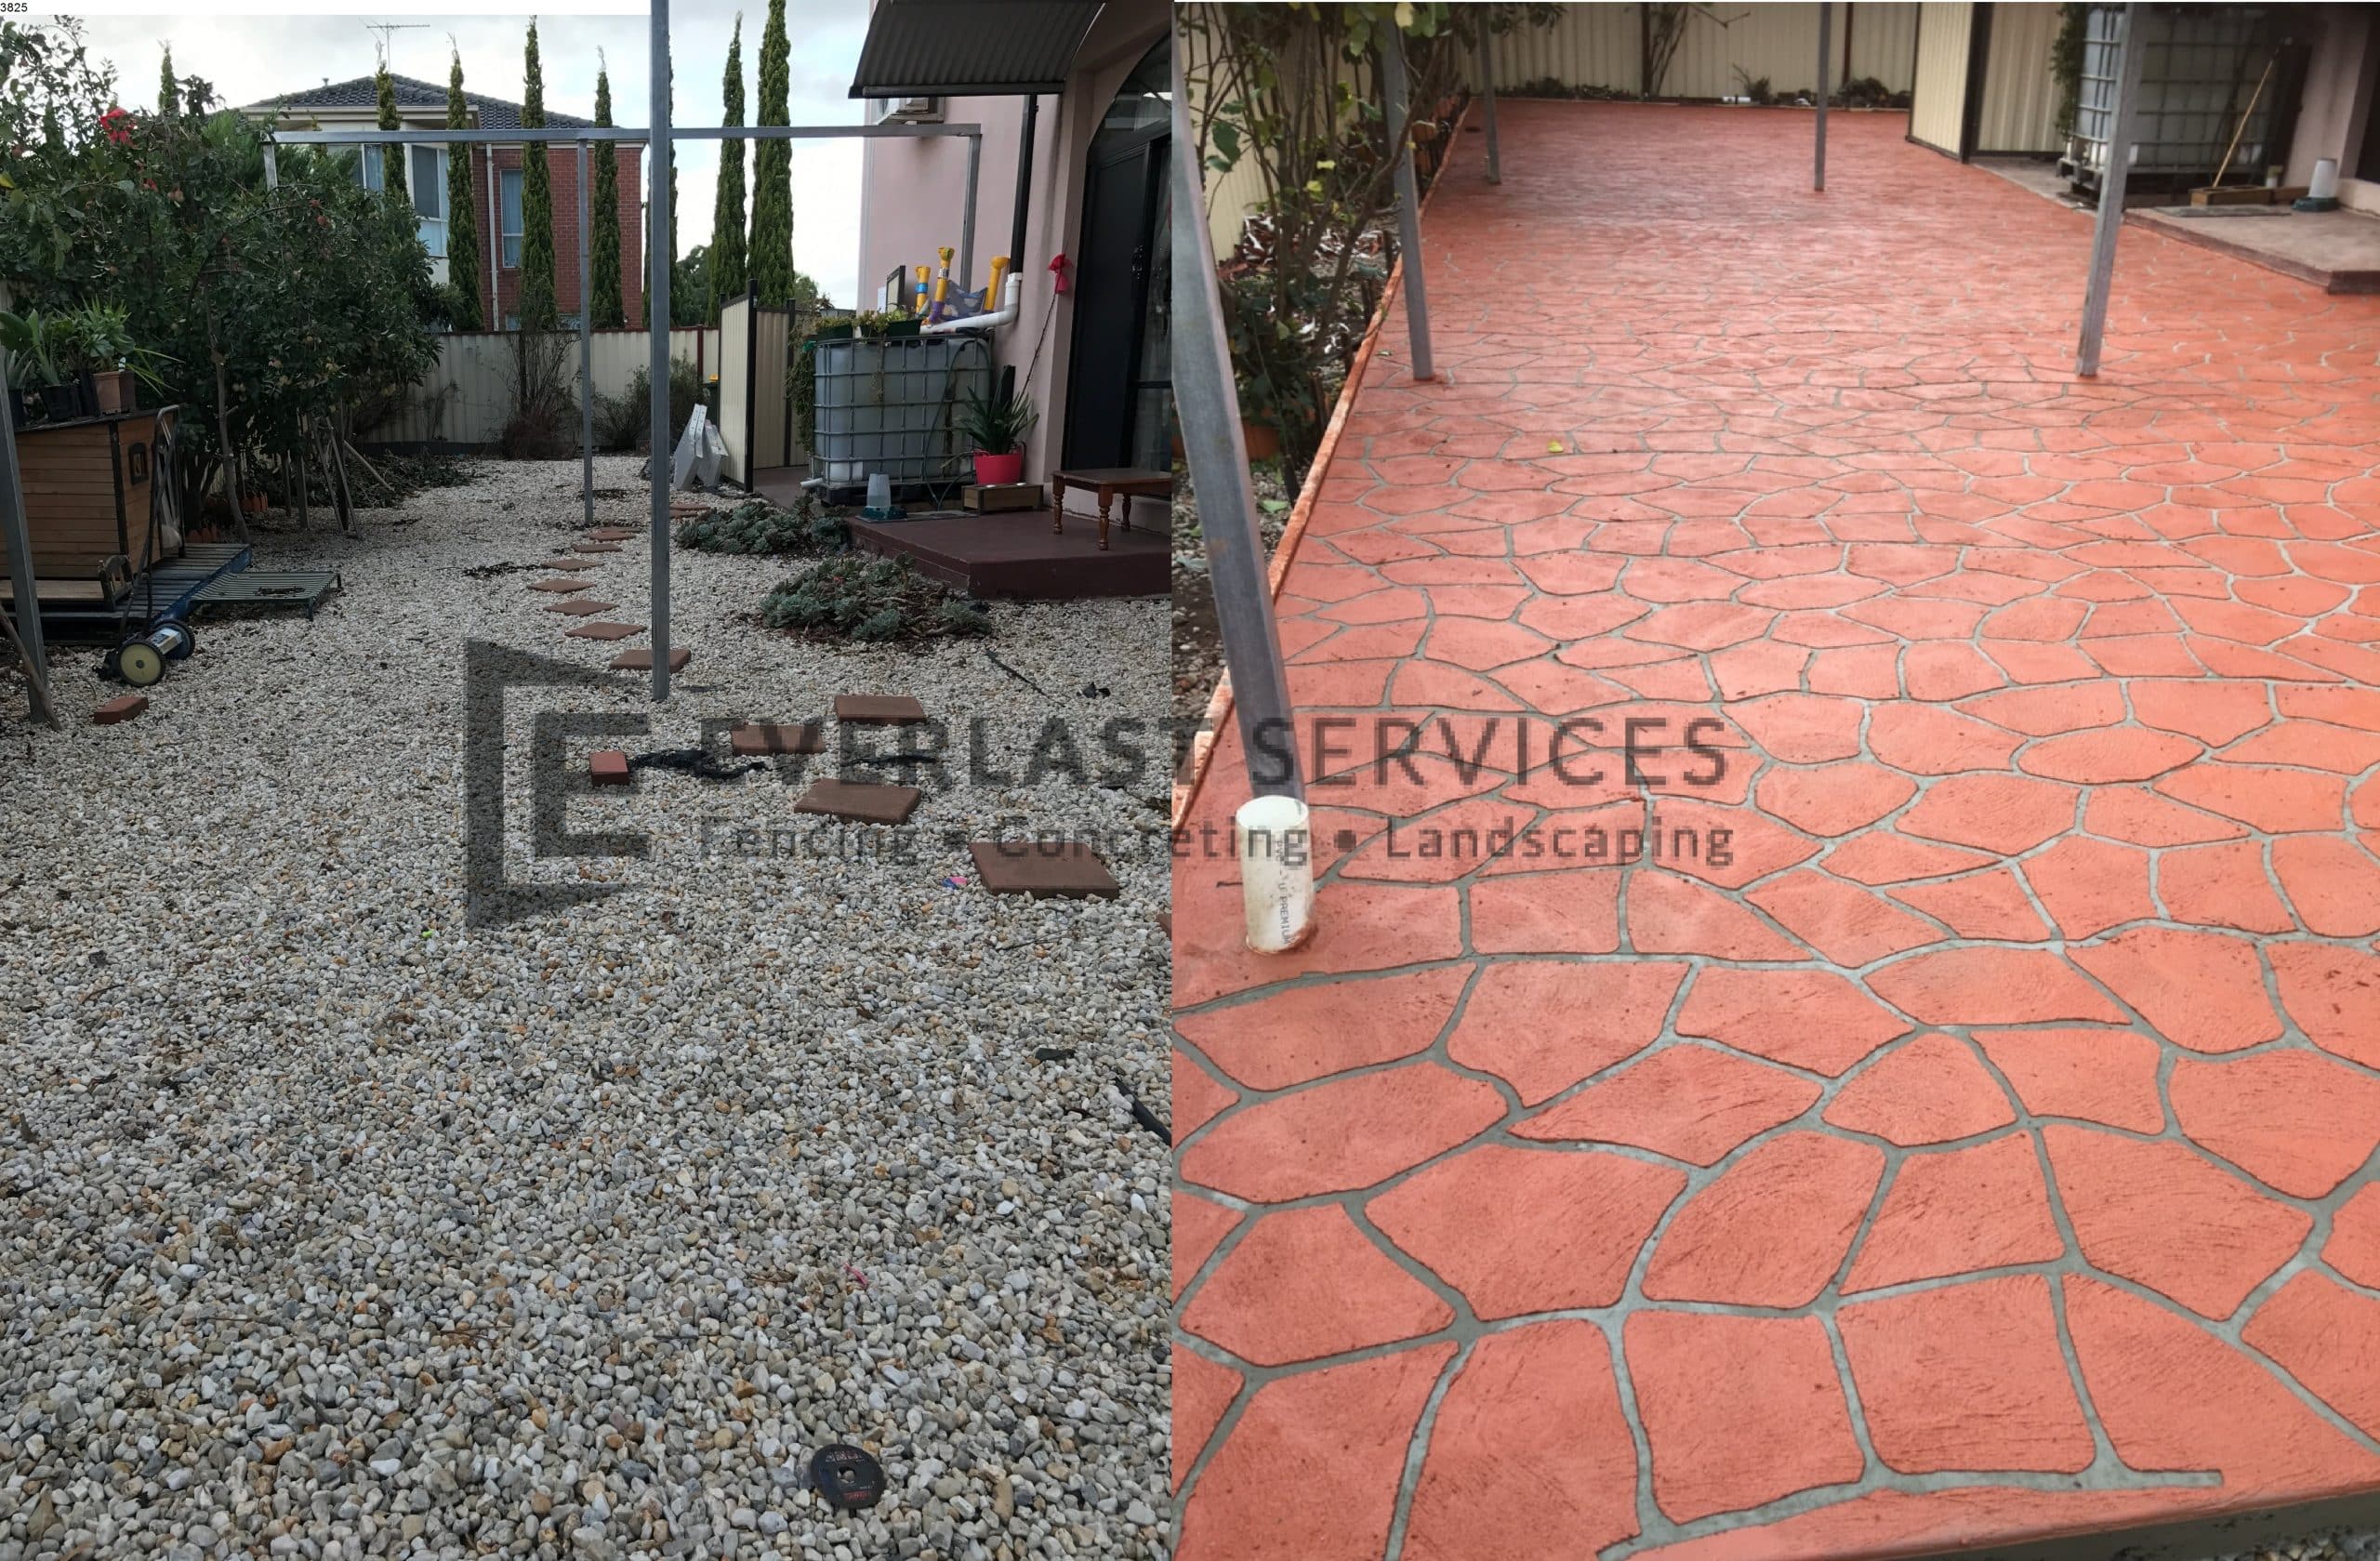 ST14 - Before and After Stencil Concrete